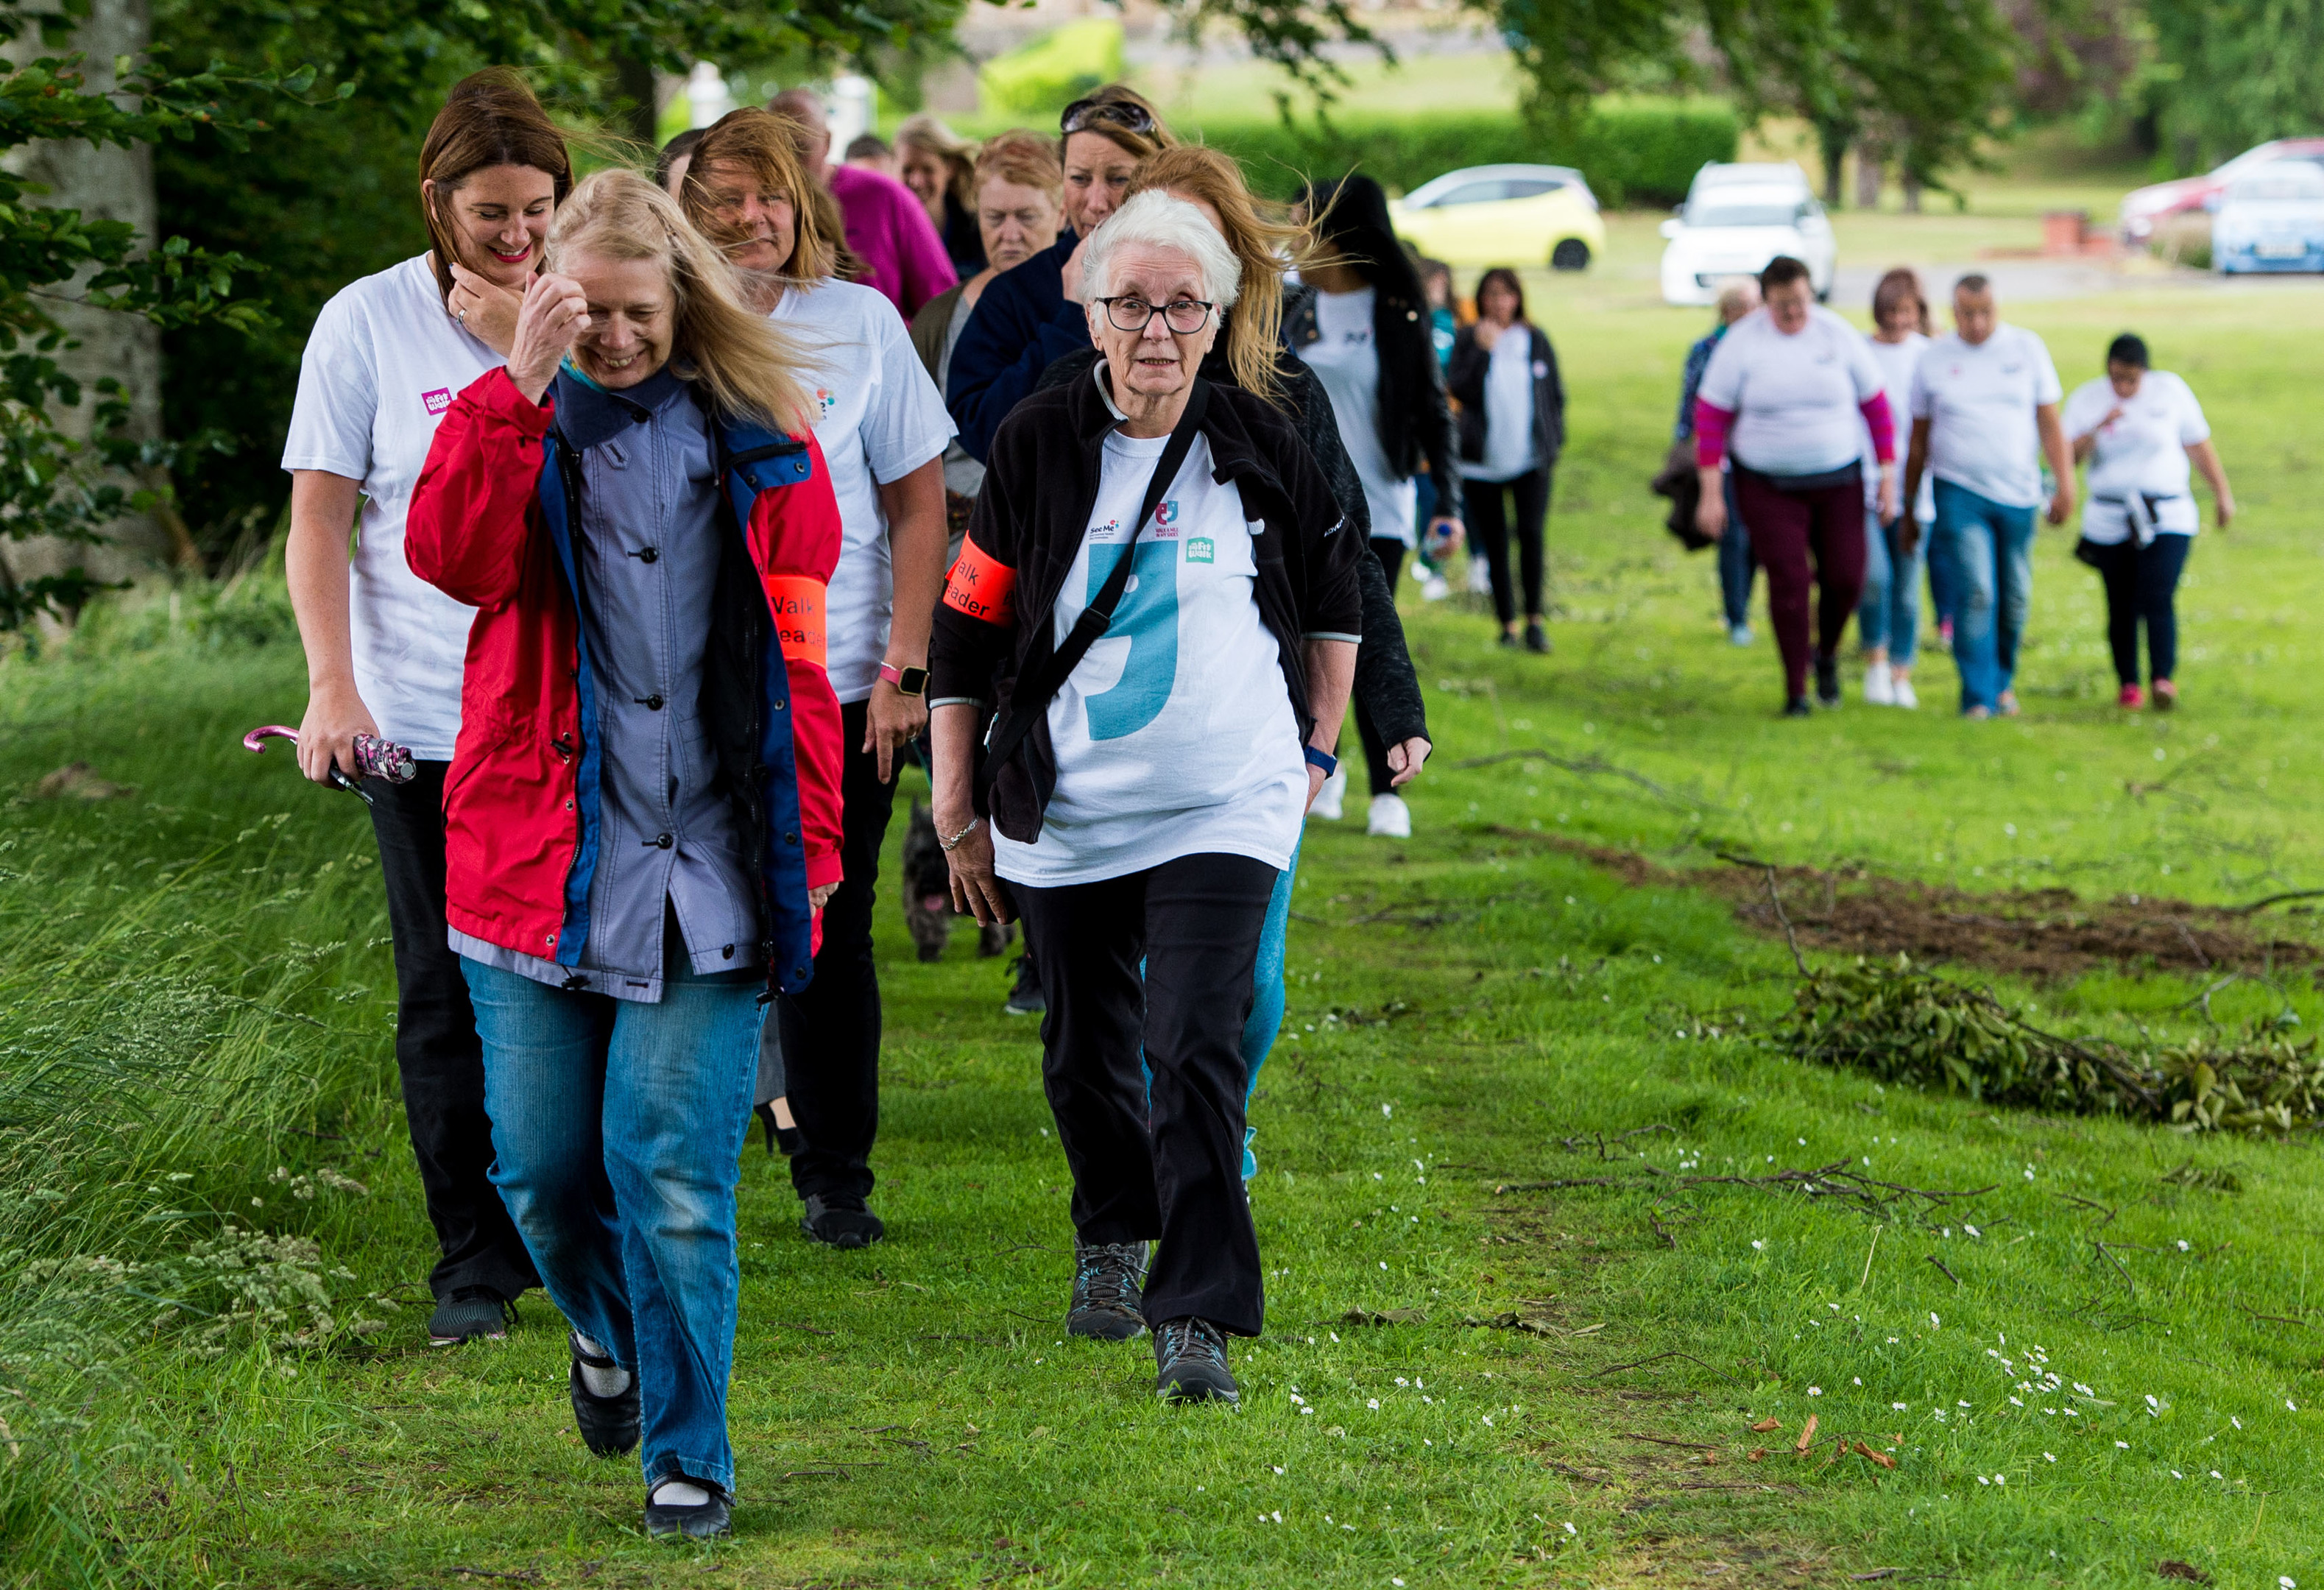 Walkers helped to raise awareness of mental health issues.